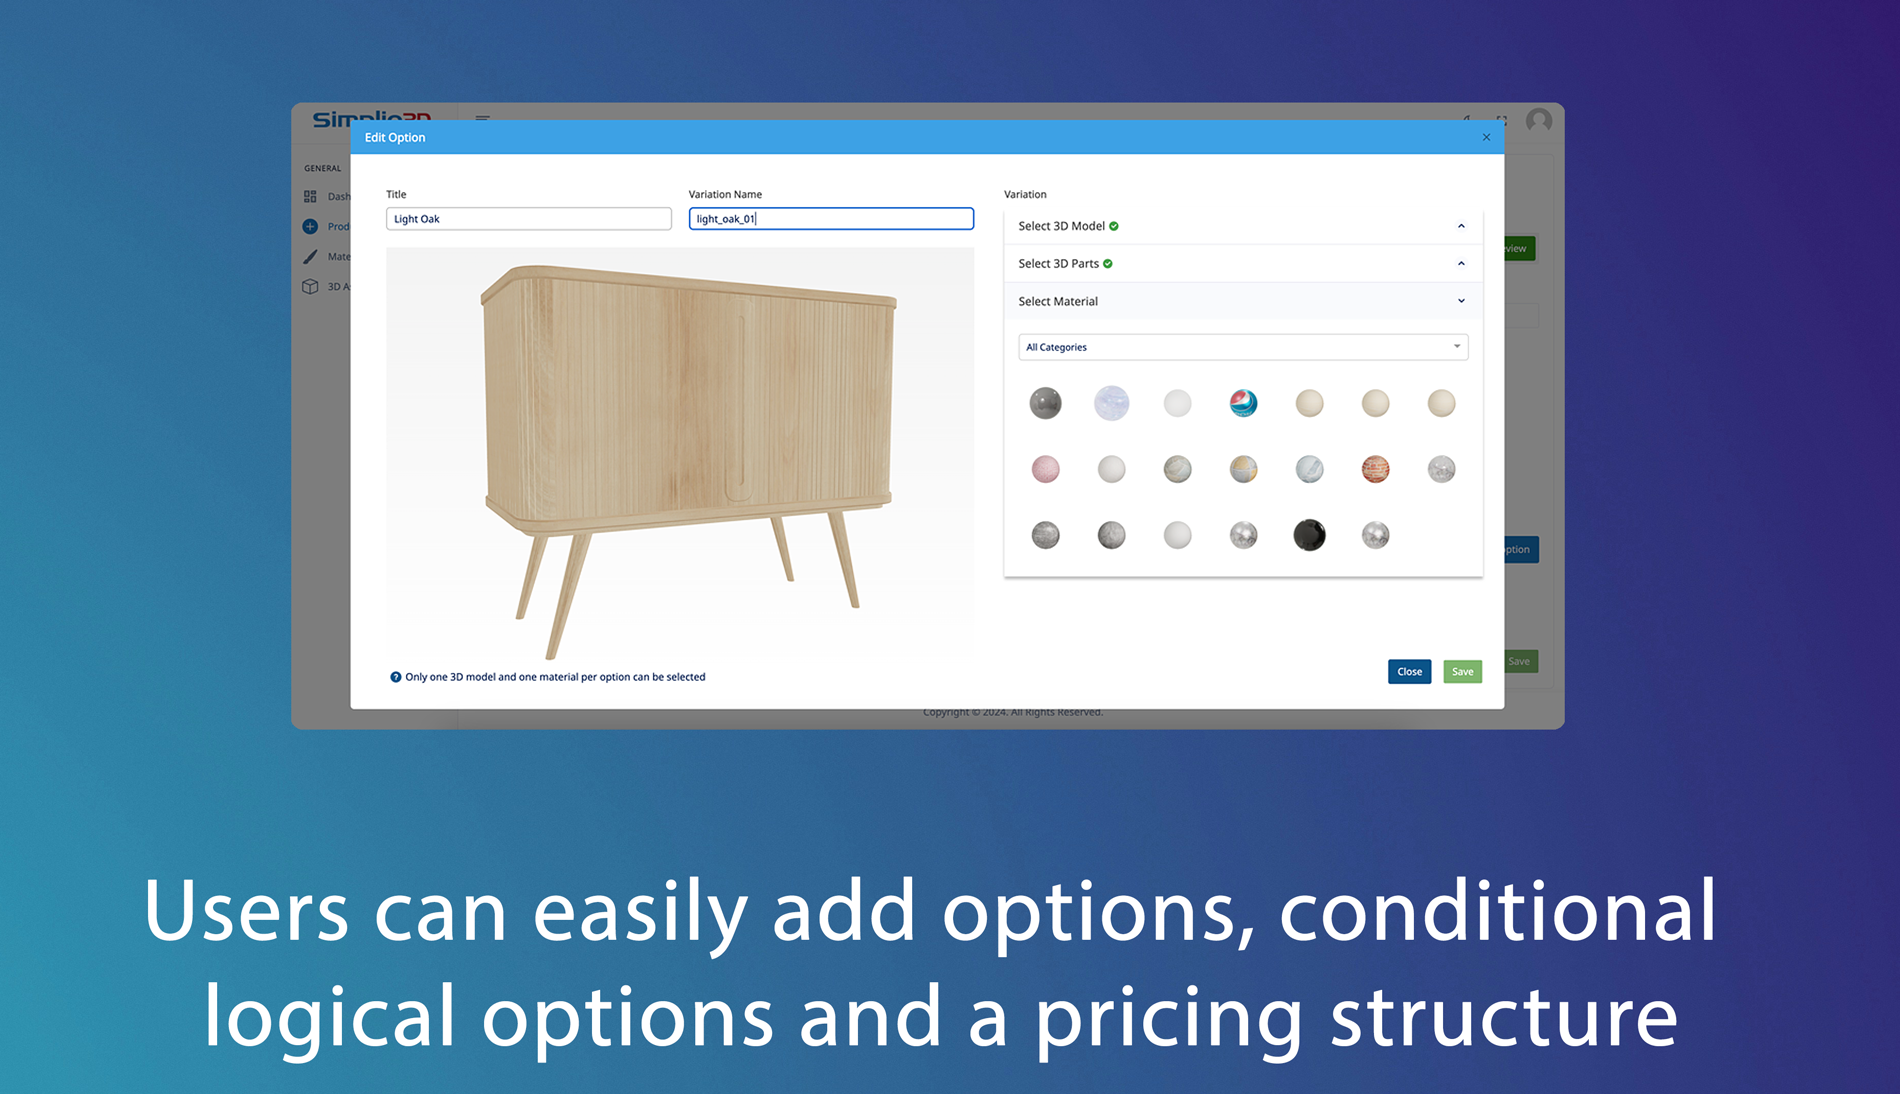 Users can easily add options, conditional logical options an a pricing structure